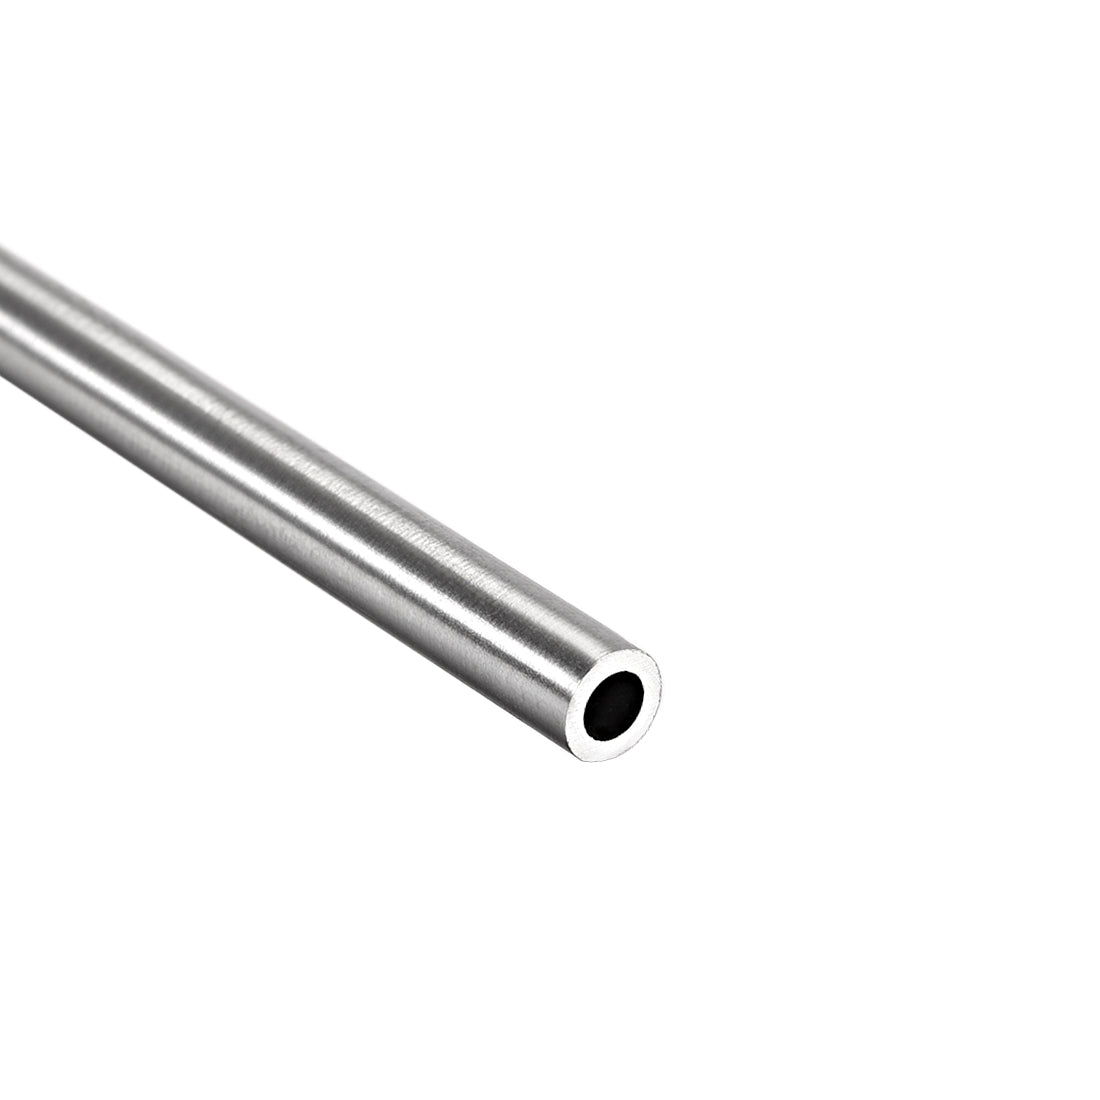 Uxcell Uxcell 304 Stainless Steel Round Tubing 5mm OD 1mm Wall Thickness 250mm Length Seamless Straight Pipe Tube